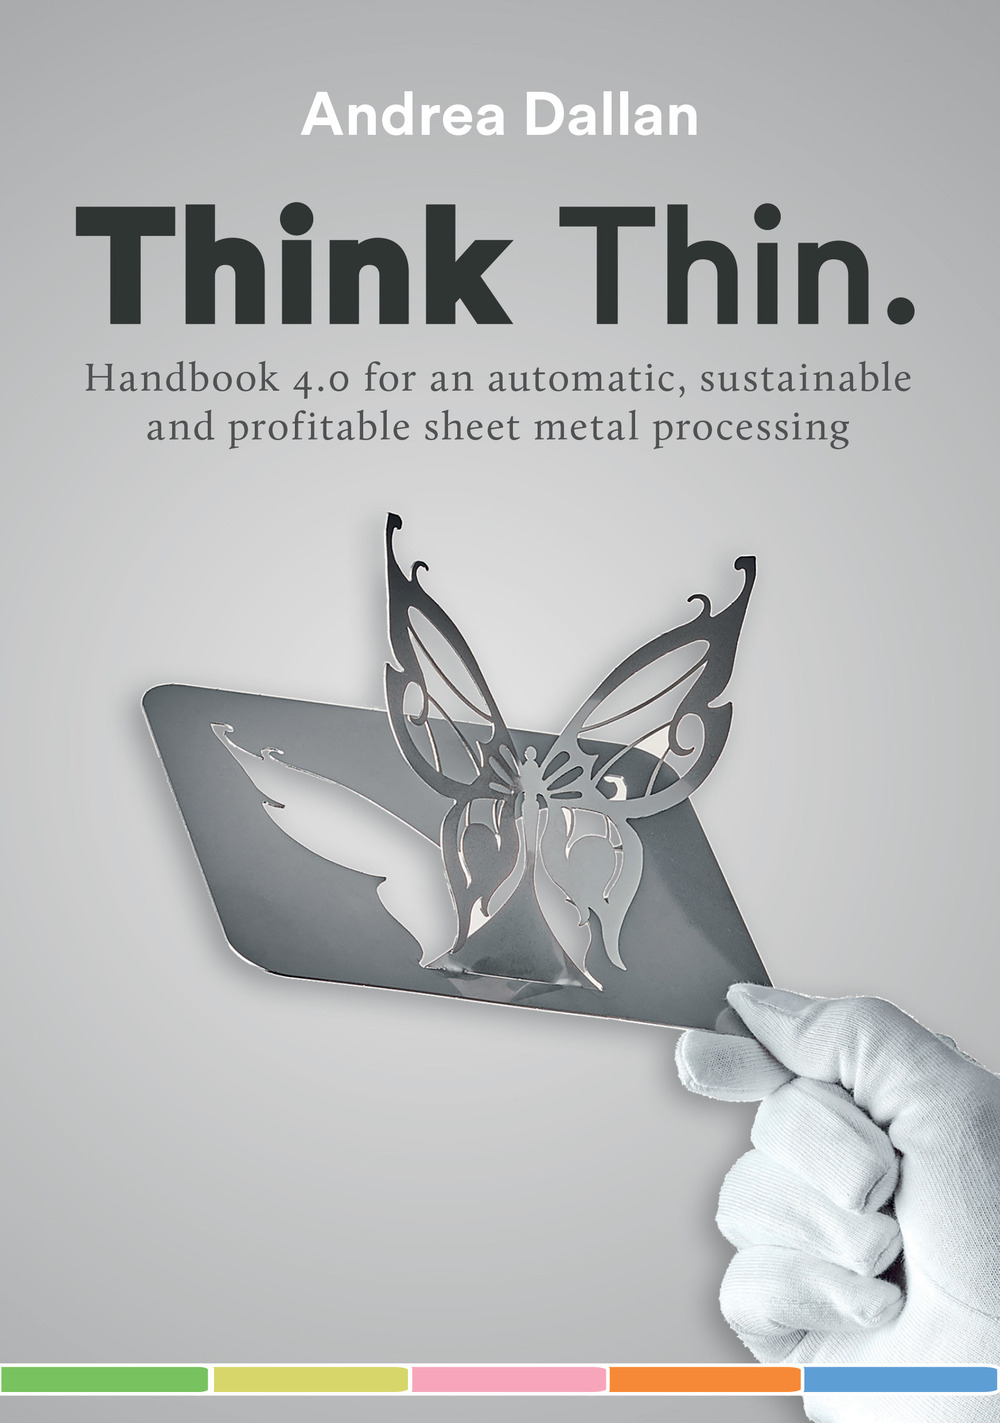 Think Thin. Handbook 4.0 for an automatic and sustainable and profitable sheet metal processing